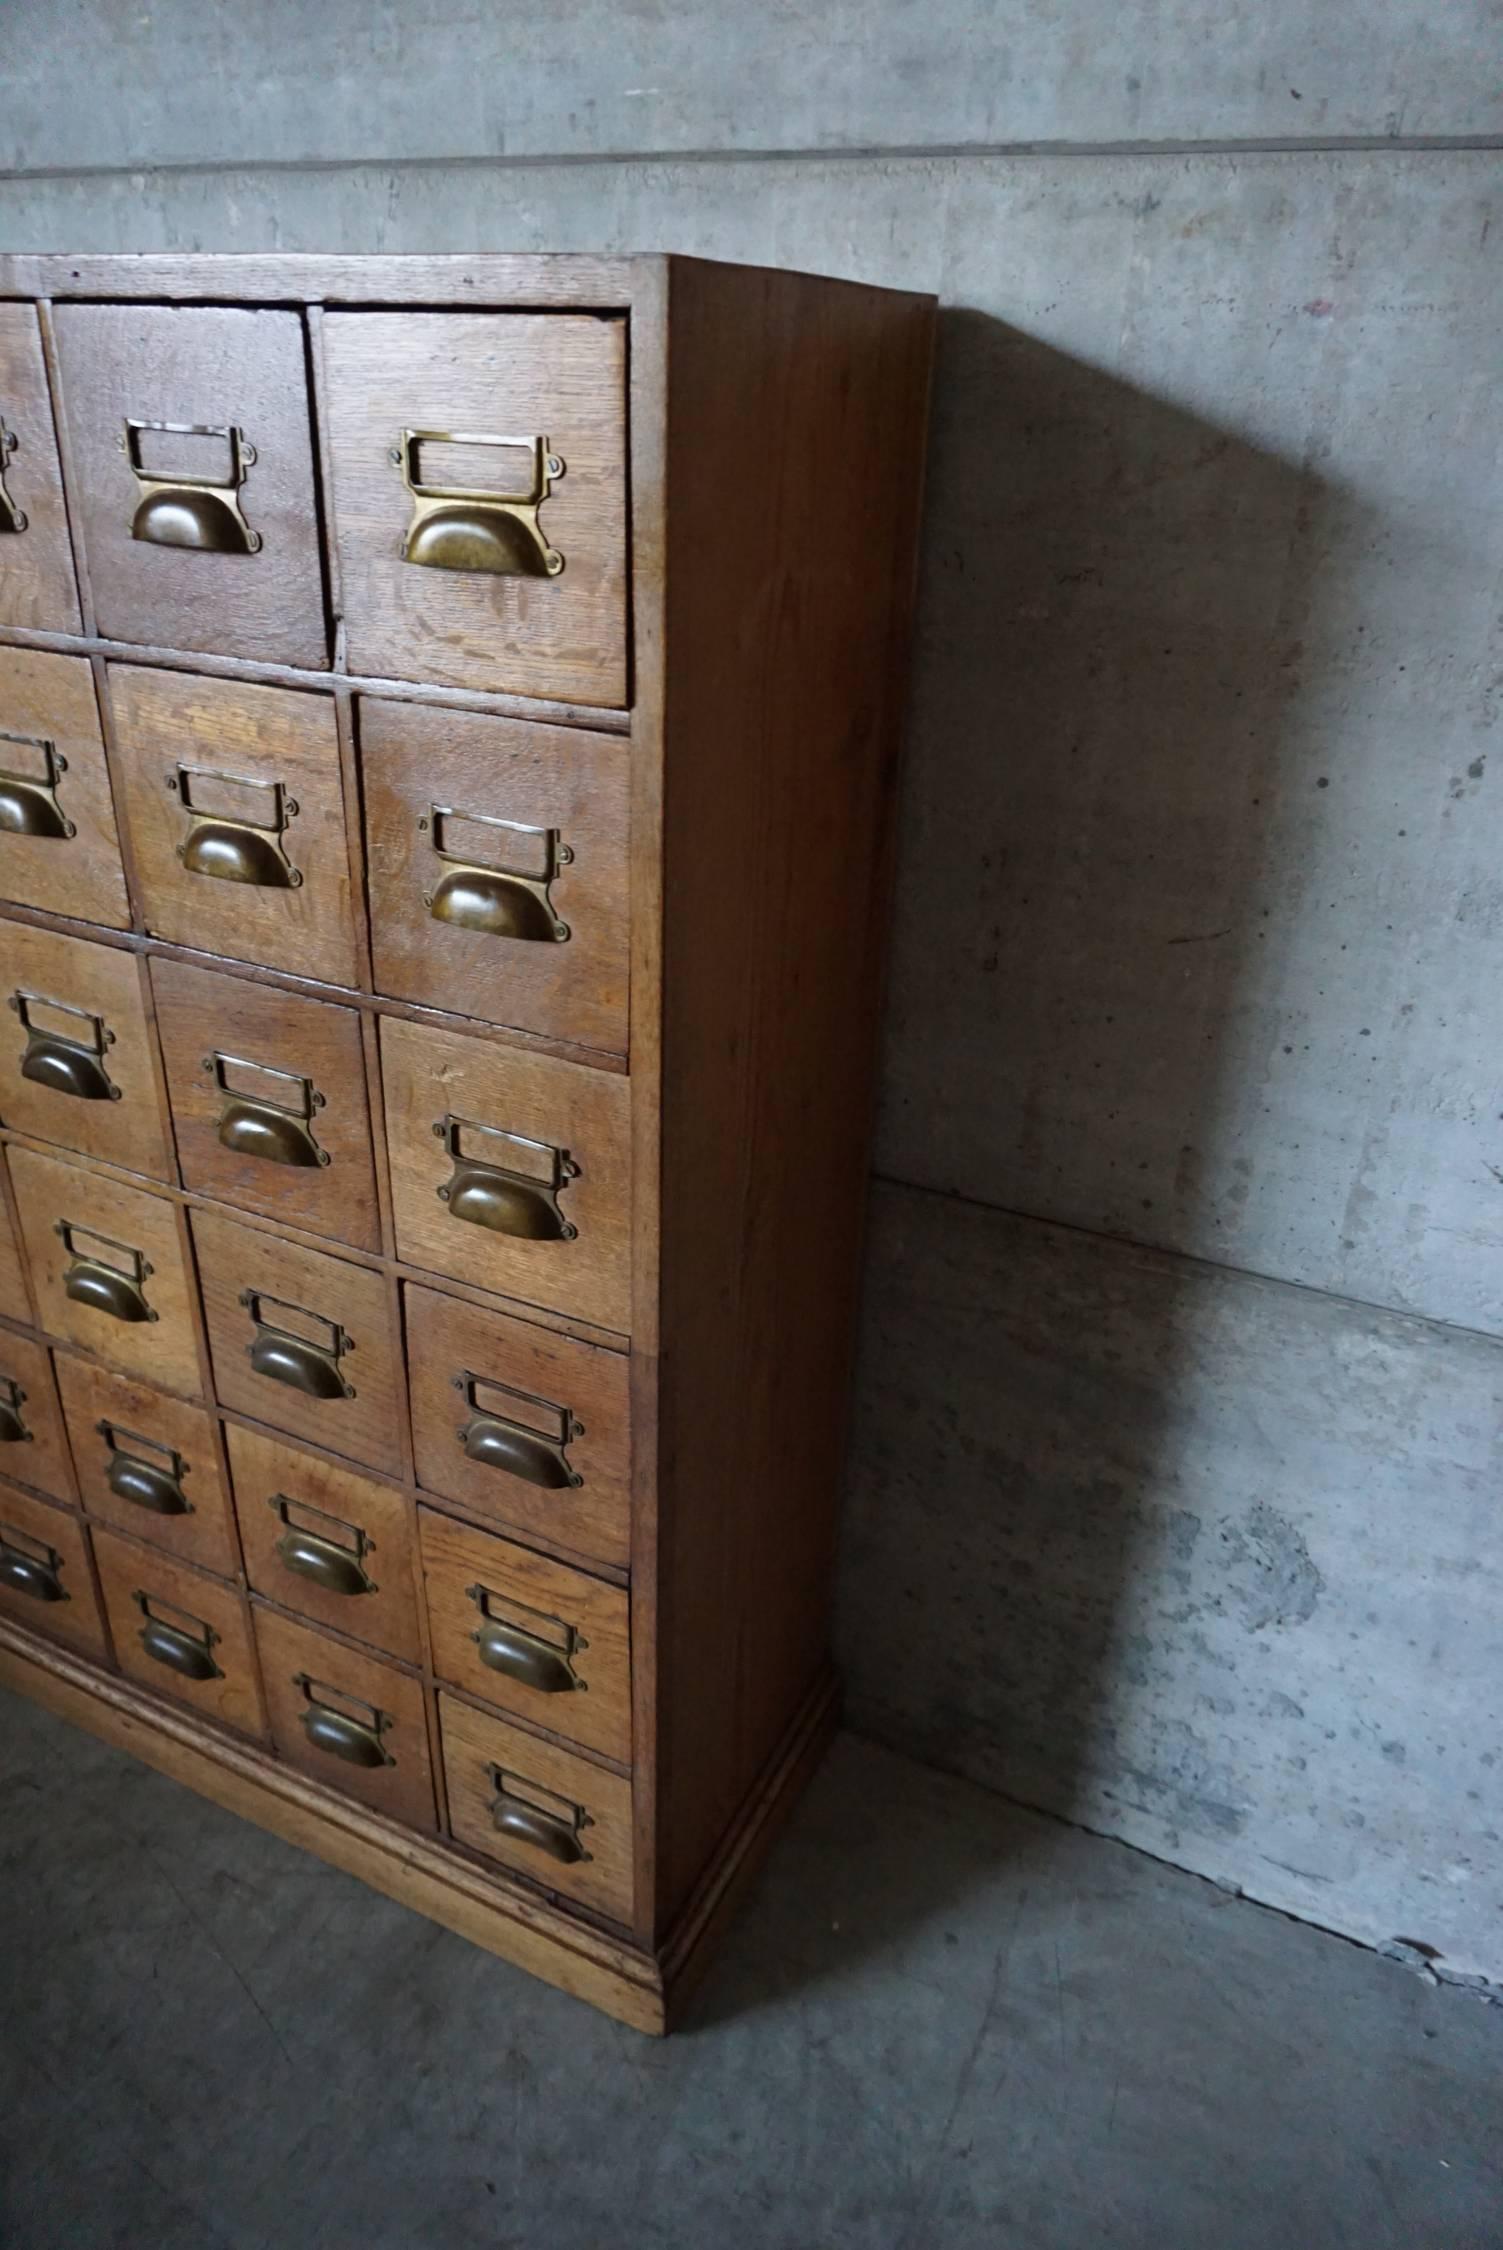 This apothecary bank of drawers was designed and made around the 1930s. The drawer fronts are made from oak with brass hardware.